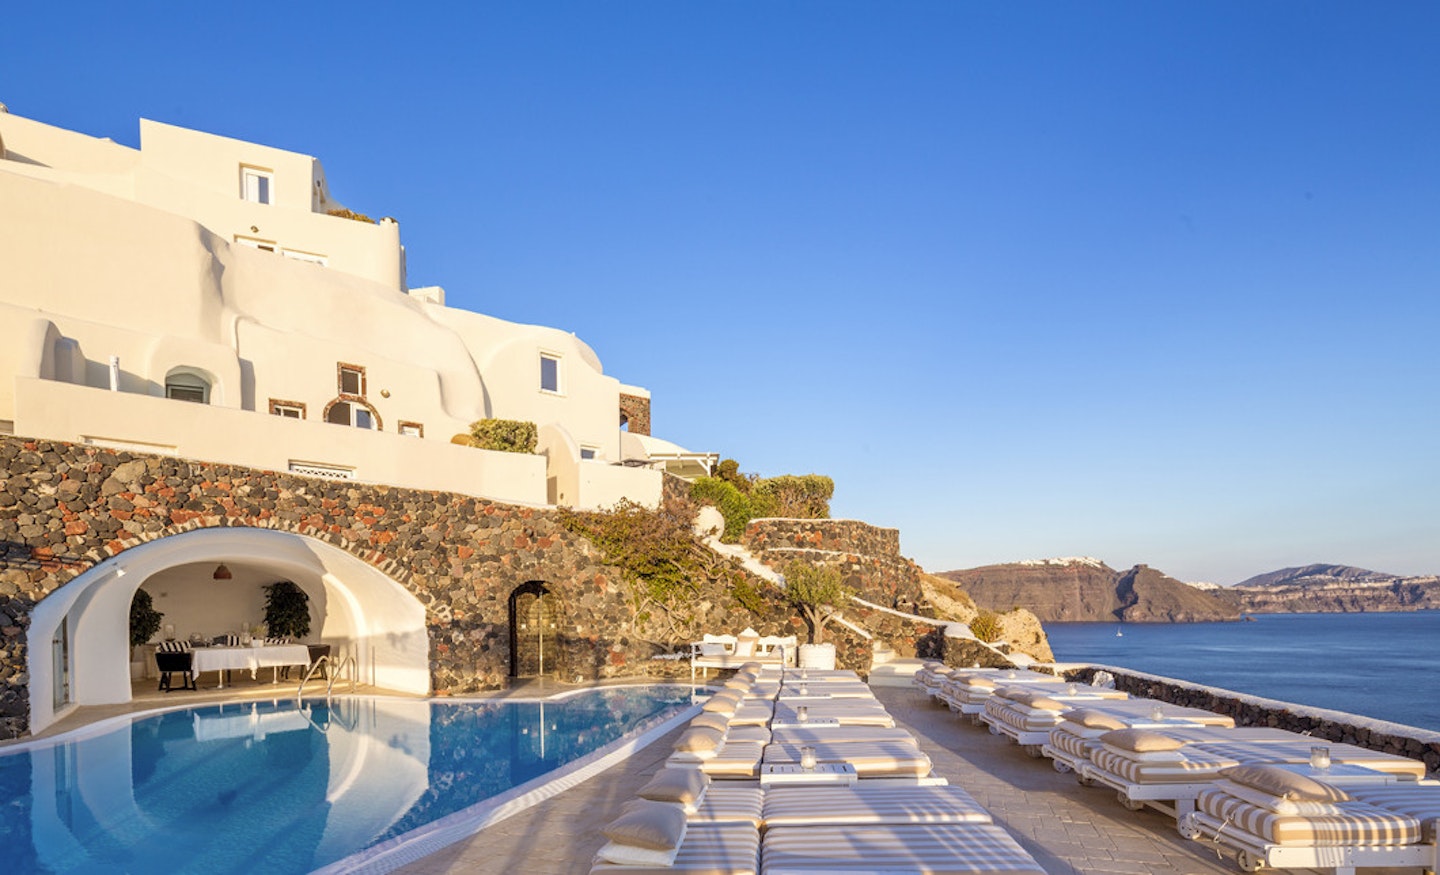 The Canavas Oia Suites